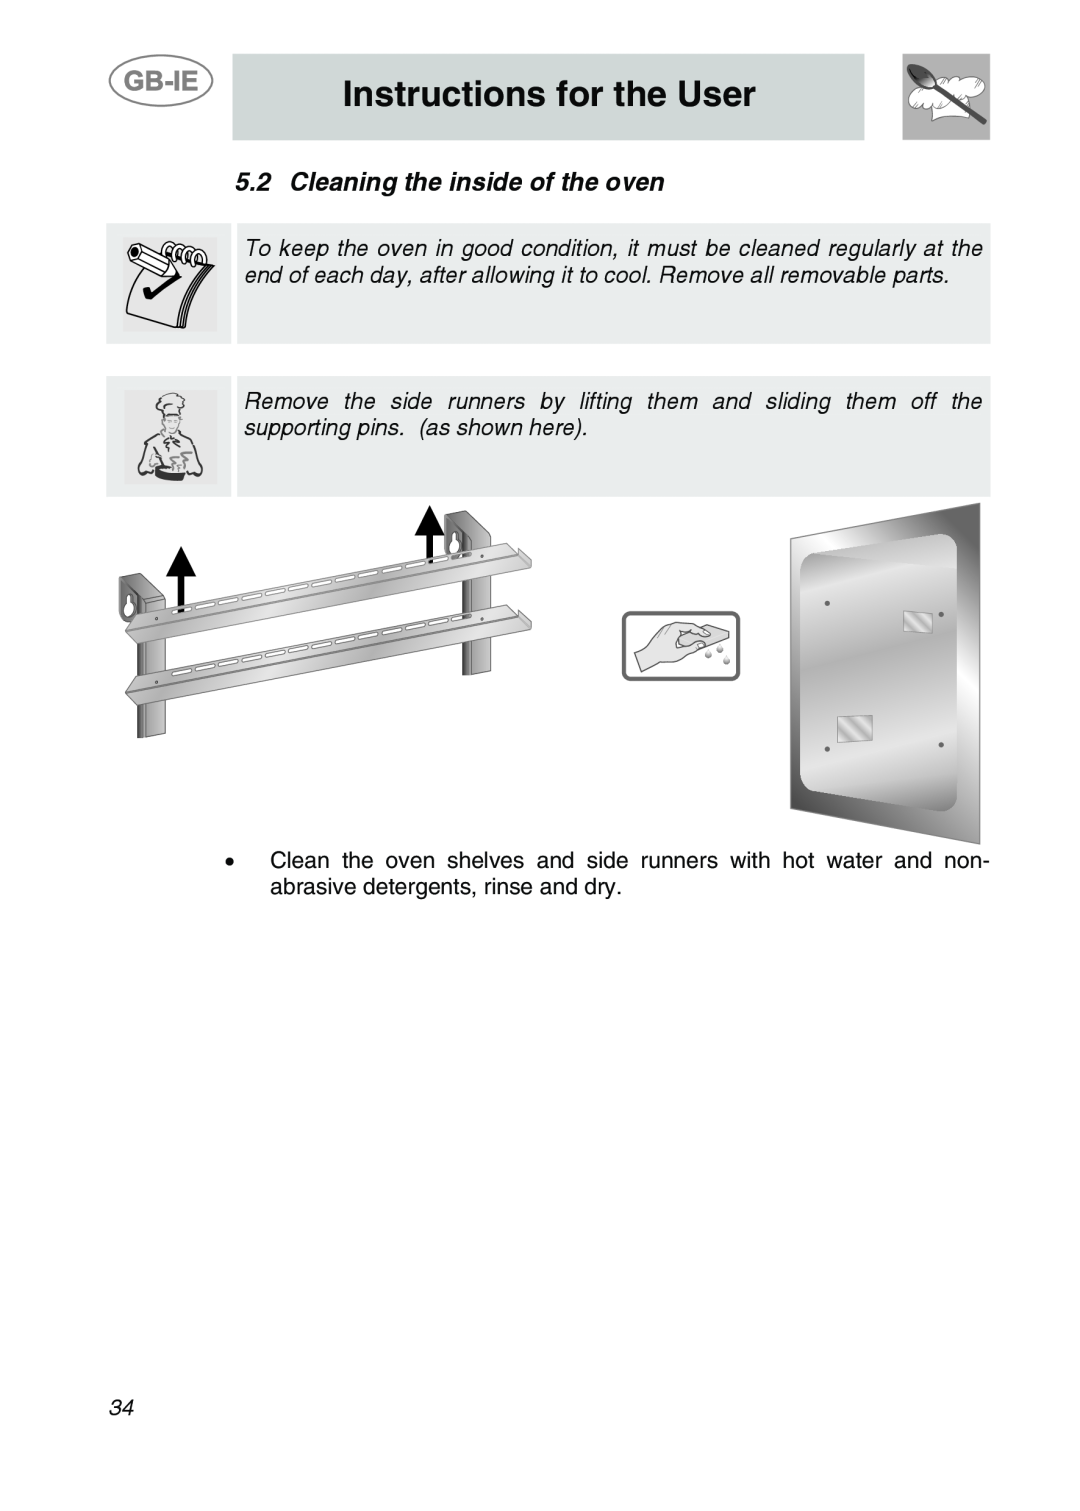 Smeg ALFA201XE manual Cleaning the inside of the oven, Instructions for the User, abrasive detergents, rinse and dry 